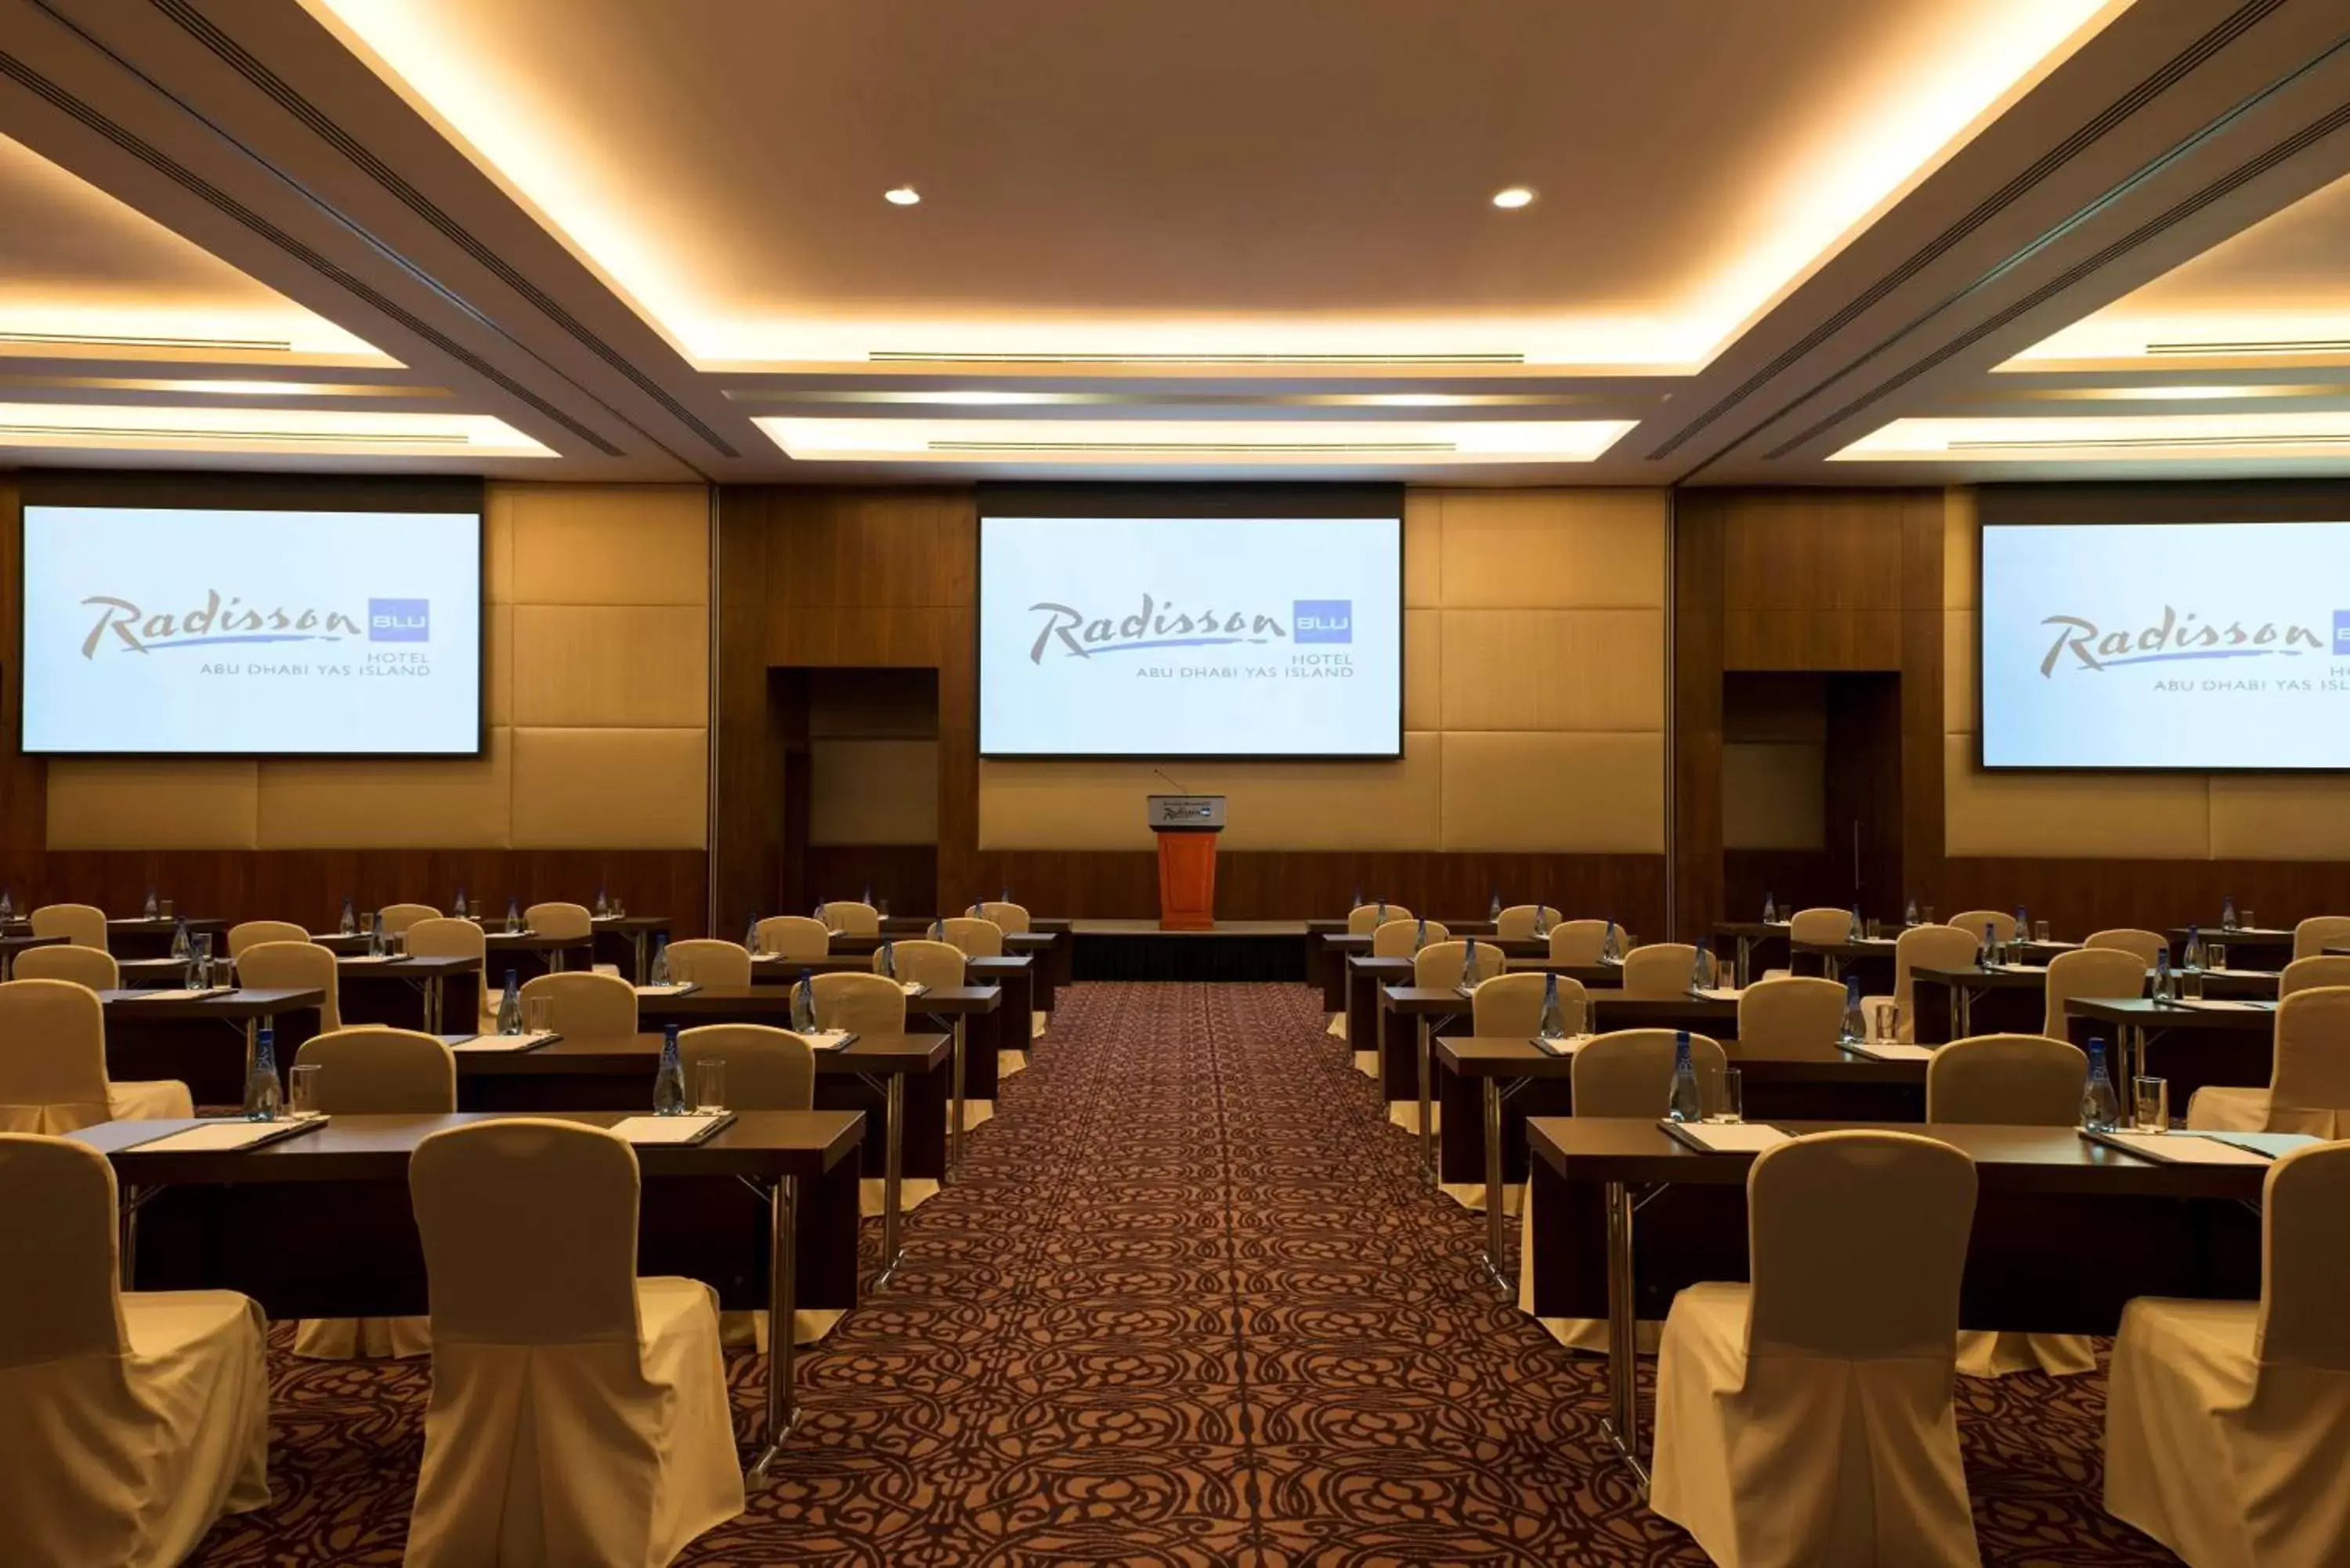 Meeting/conference room, Business Area/Conference Room in Radisson Blu Hotel, Abu Dhabi Yas Island